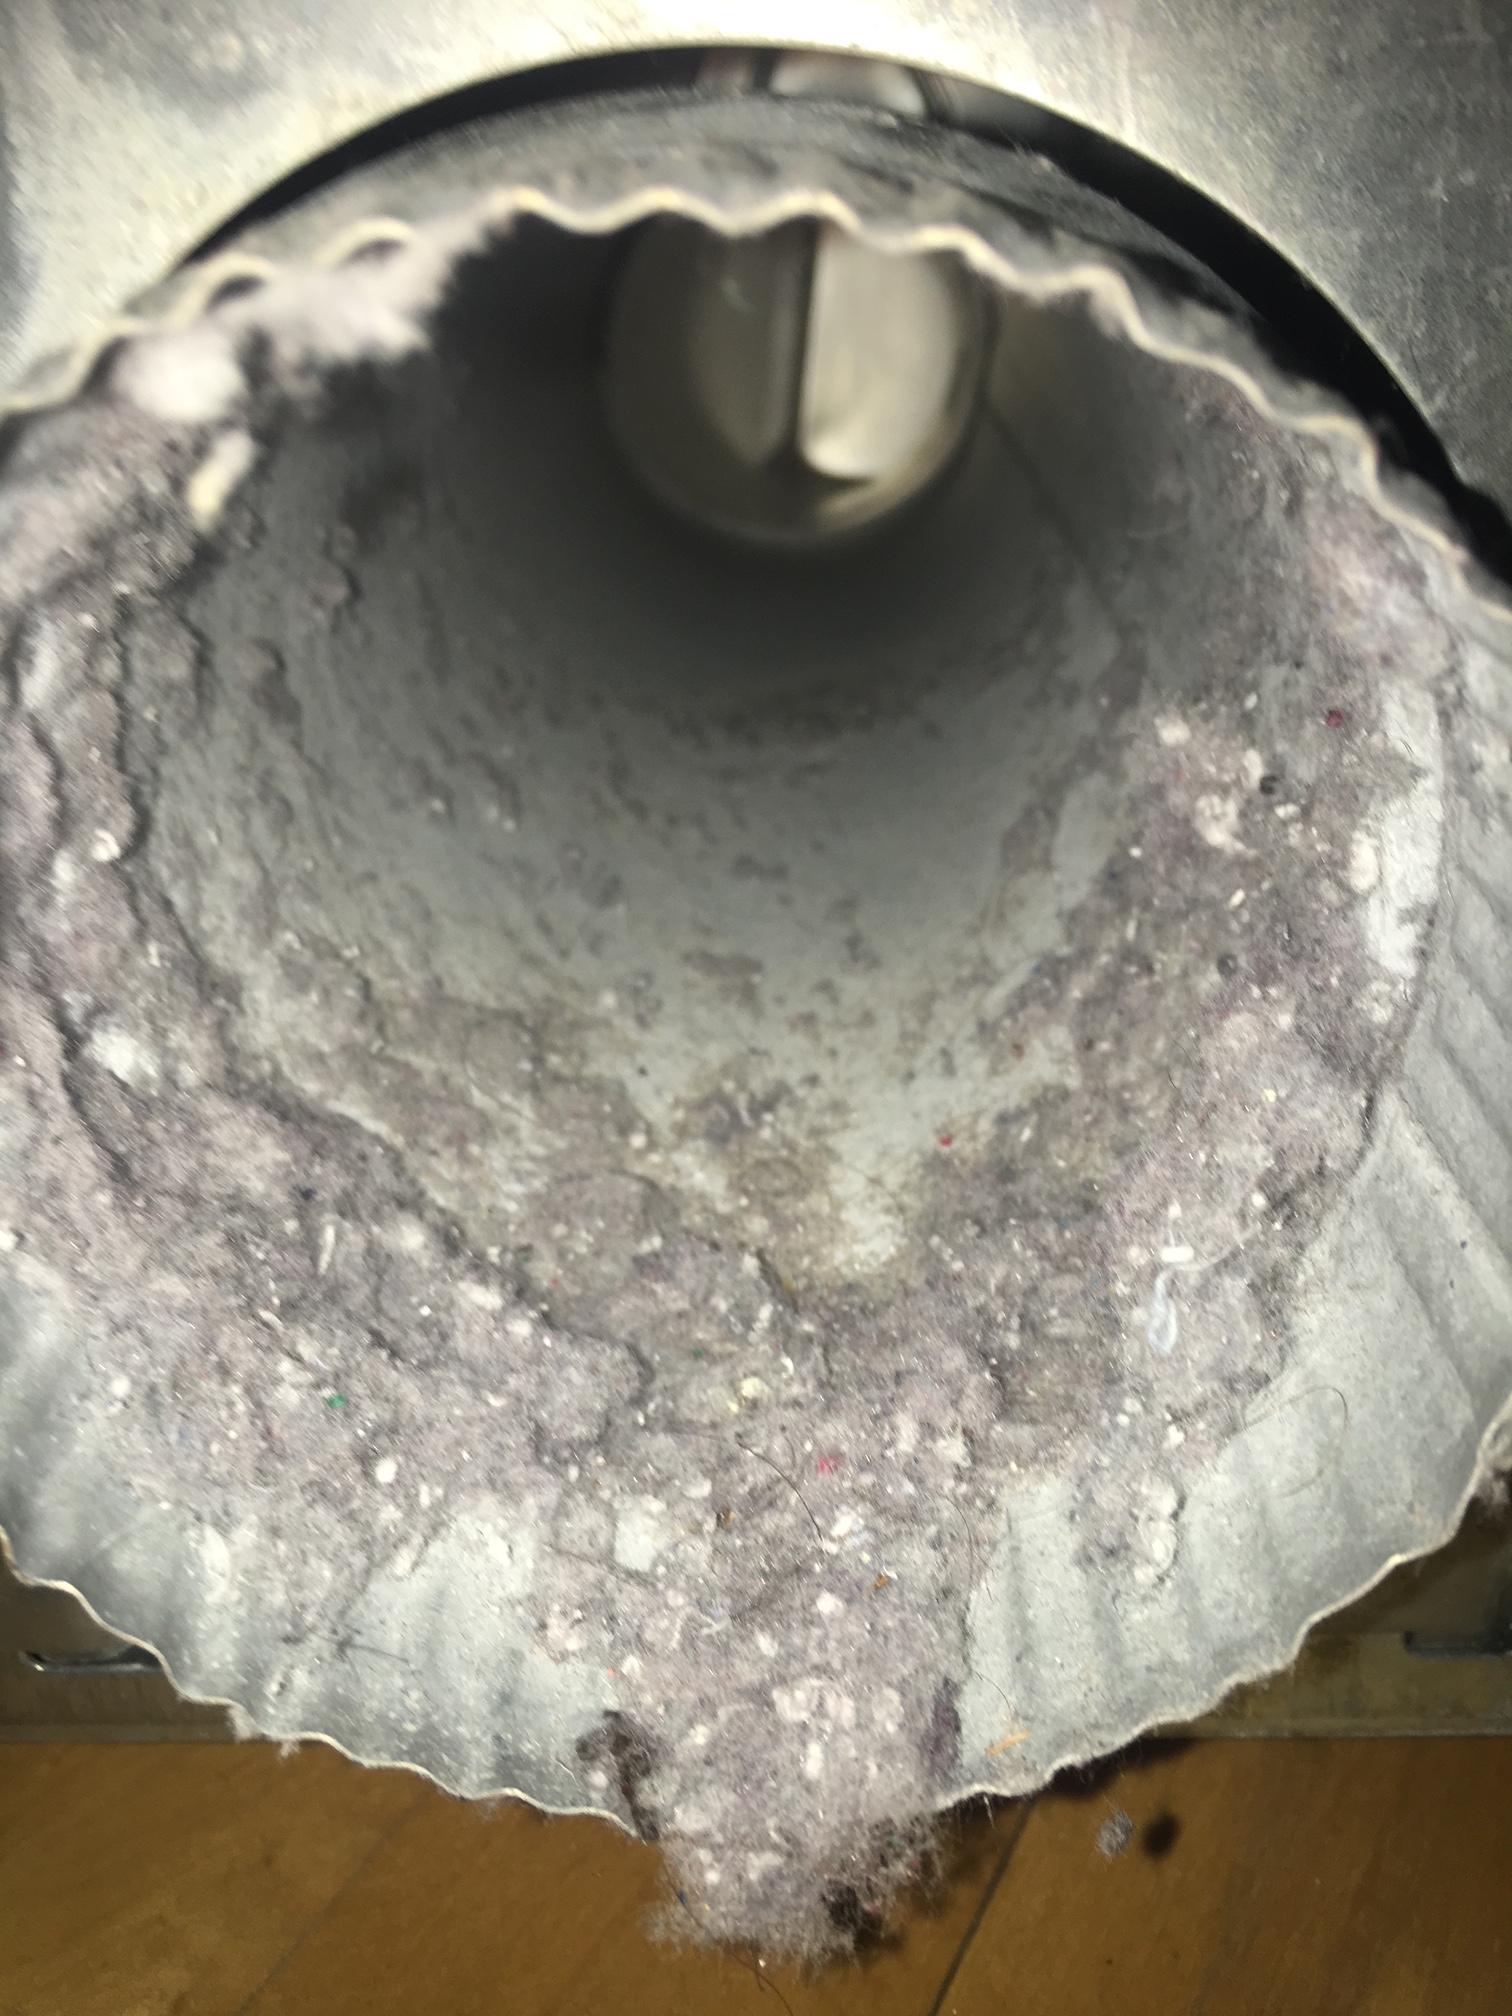 Need your dryer vents cleaned? No problem for SERVPRO!